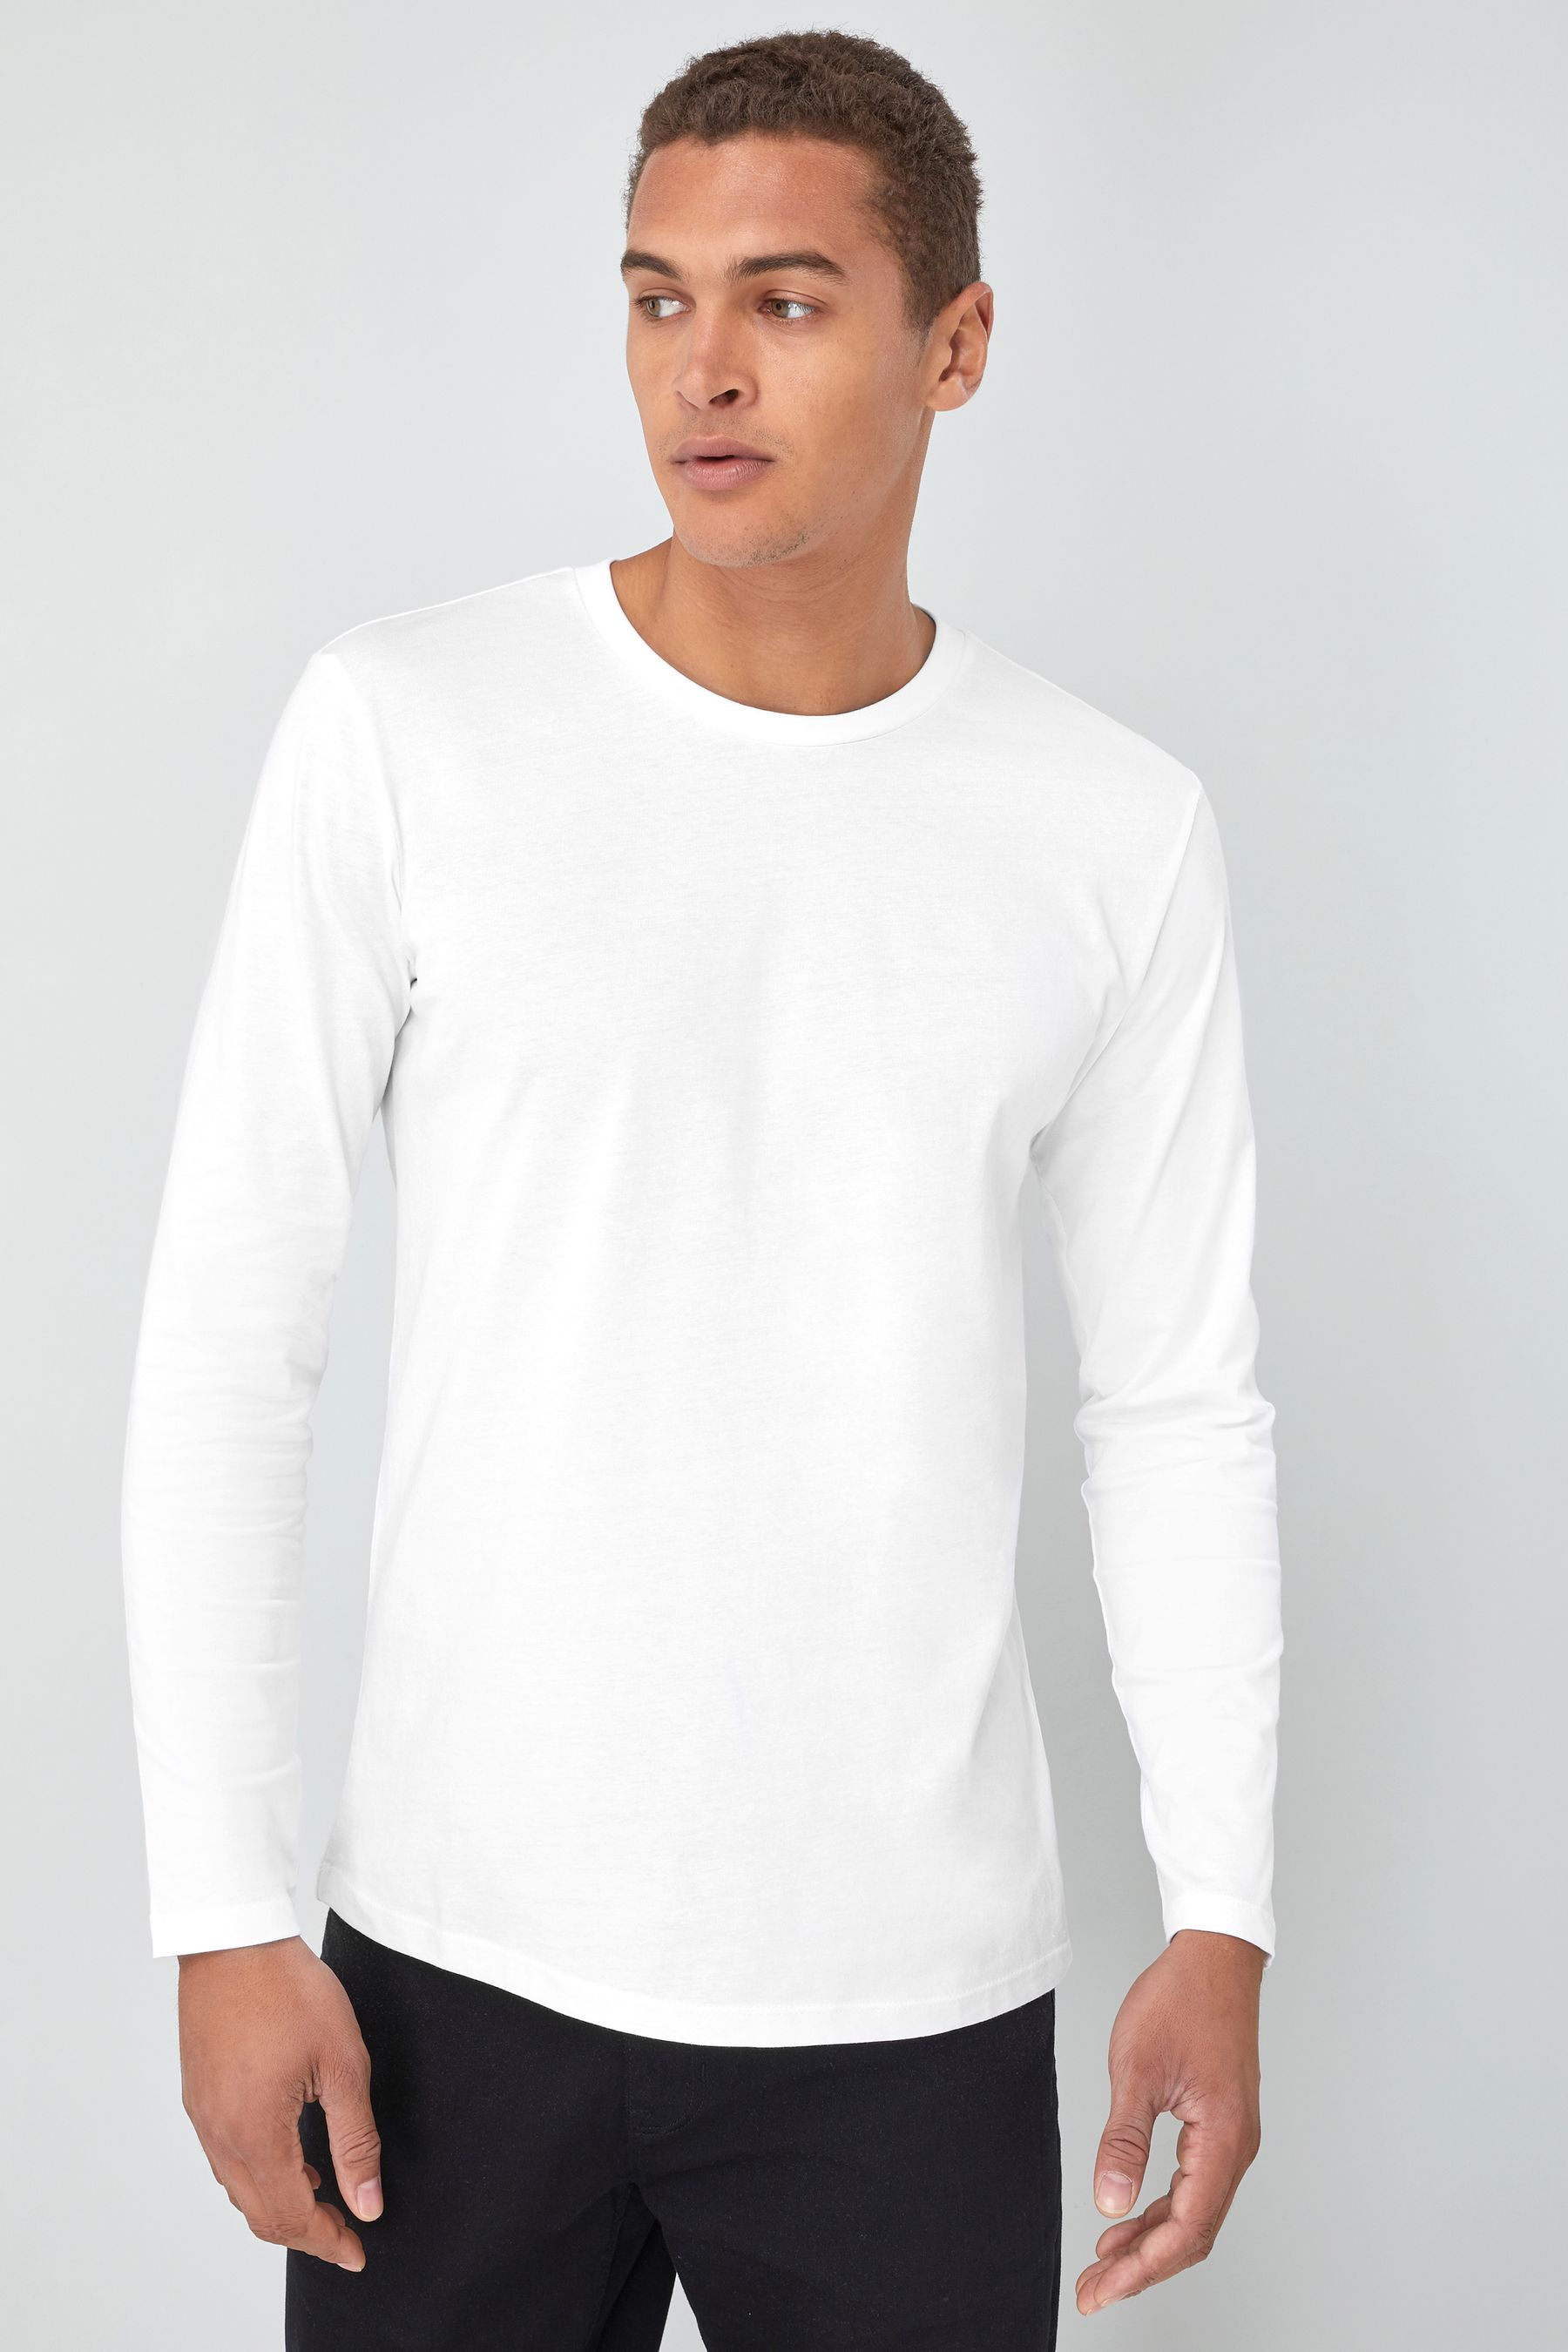 Buy White Long Sleeve Crew Neck T-Shirt from the Next UK online shop